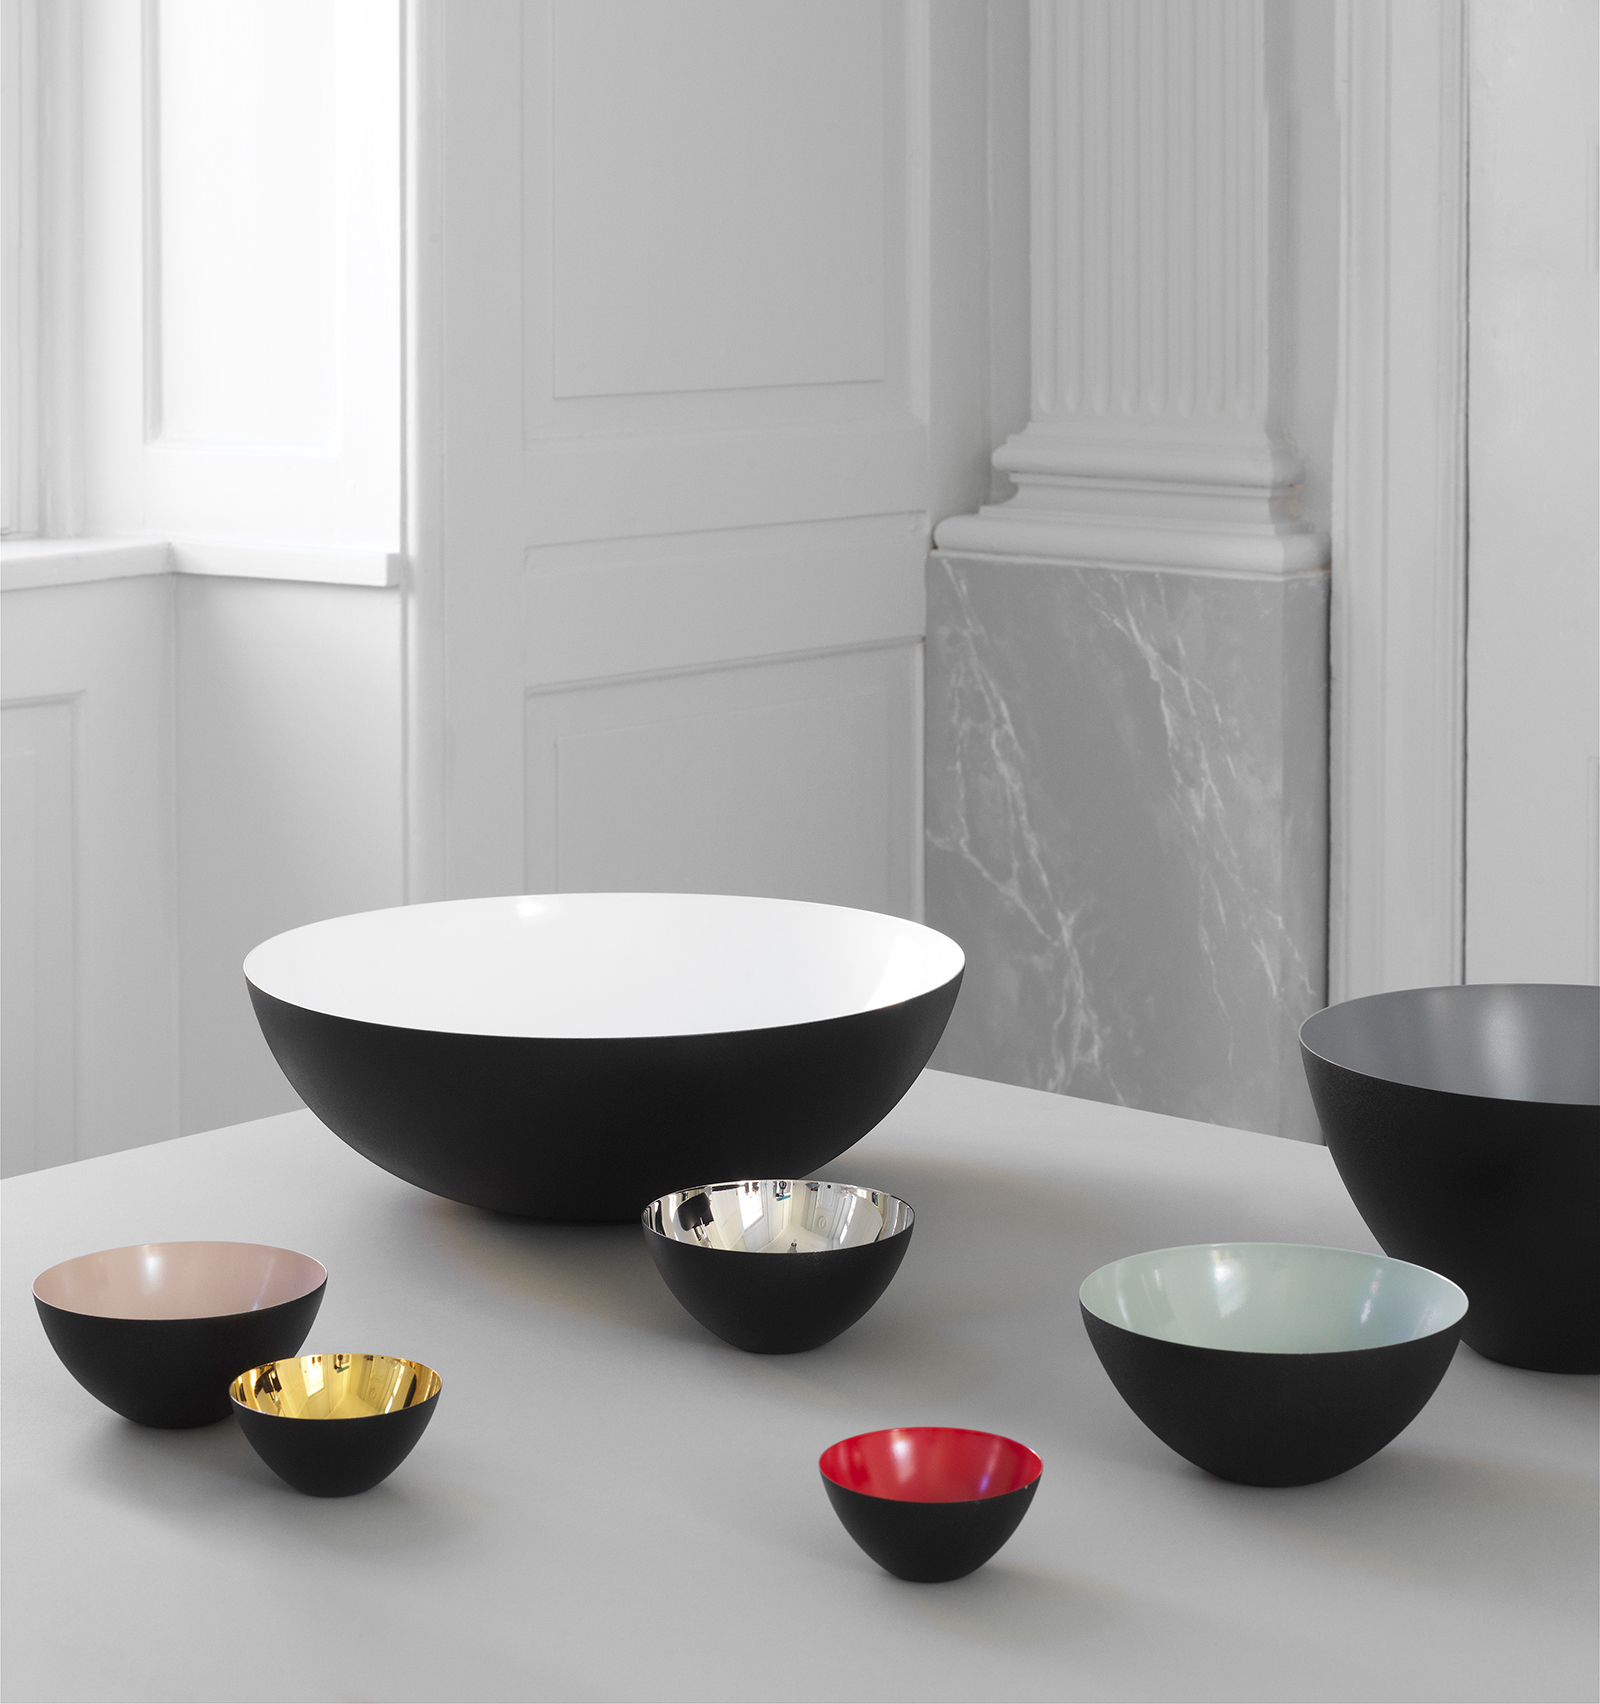 A group of Krenit bowls in varying sizes and colors